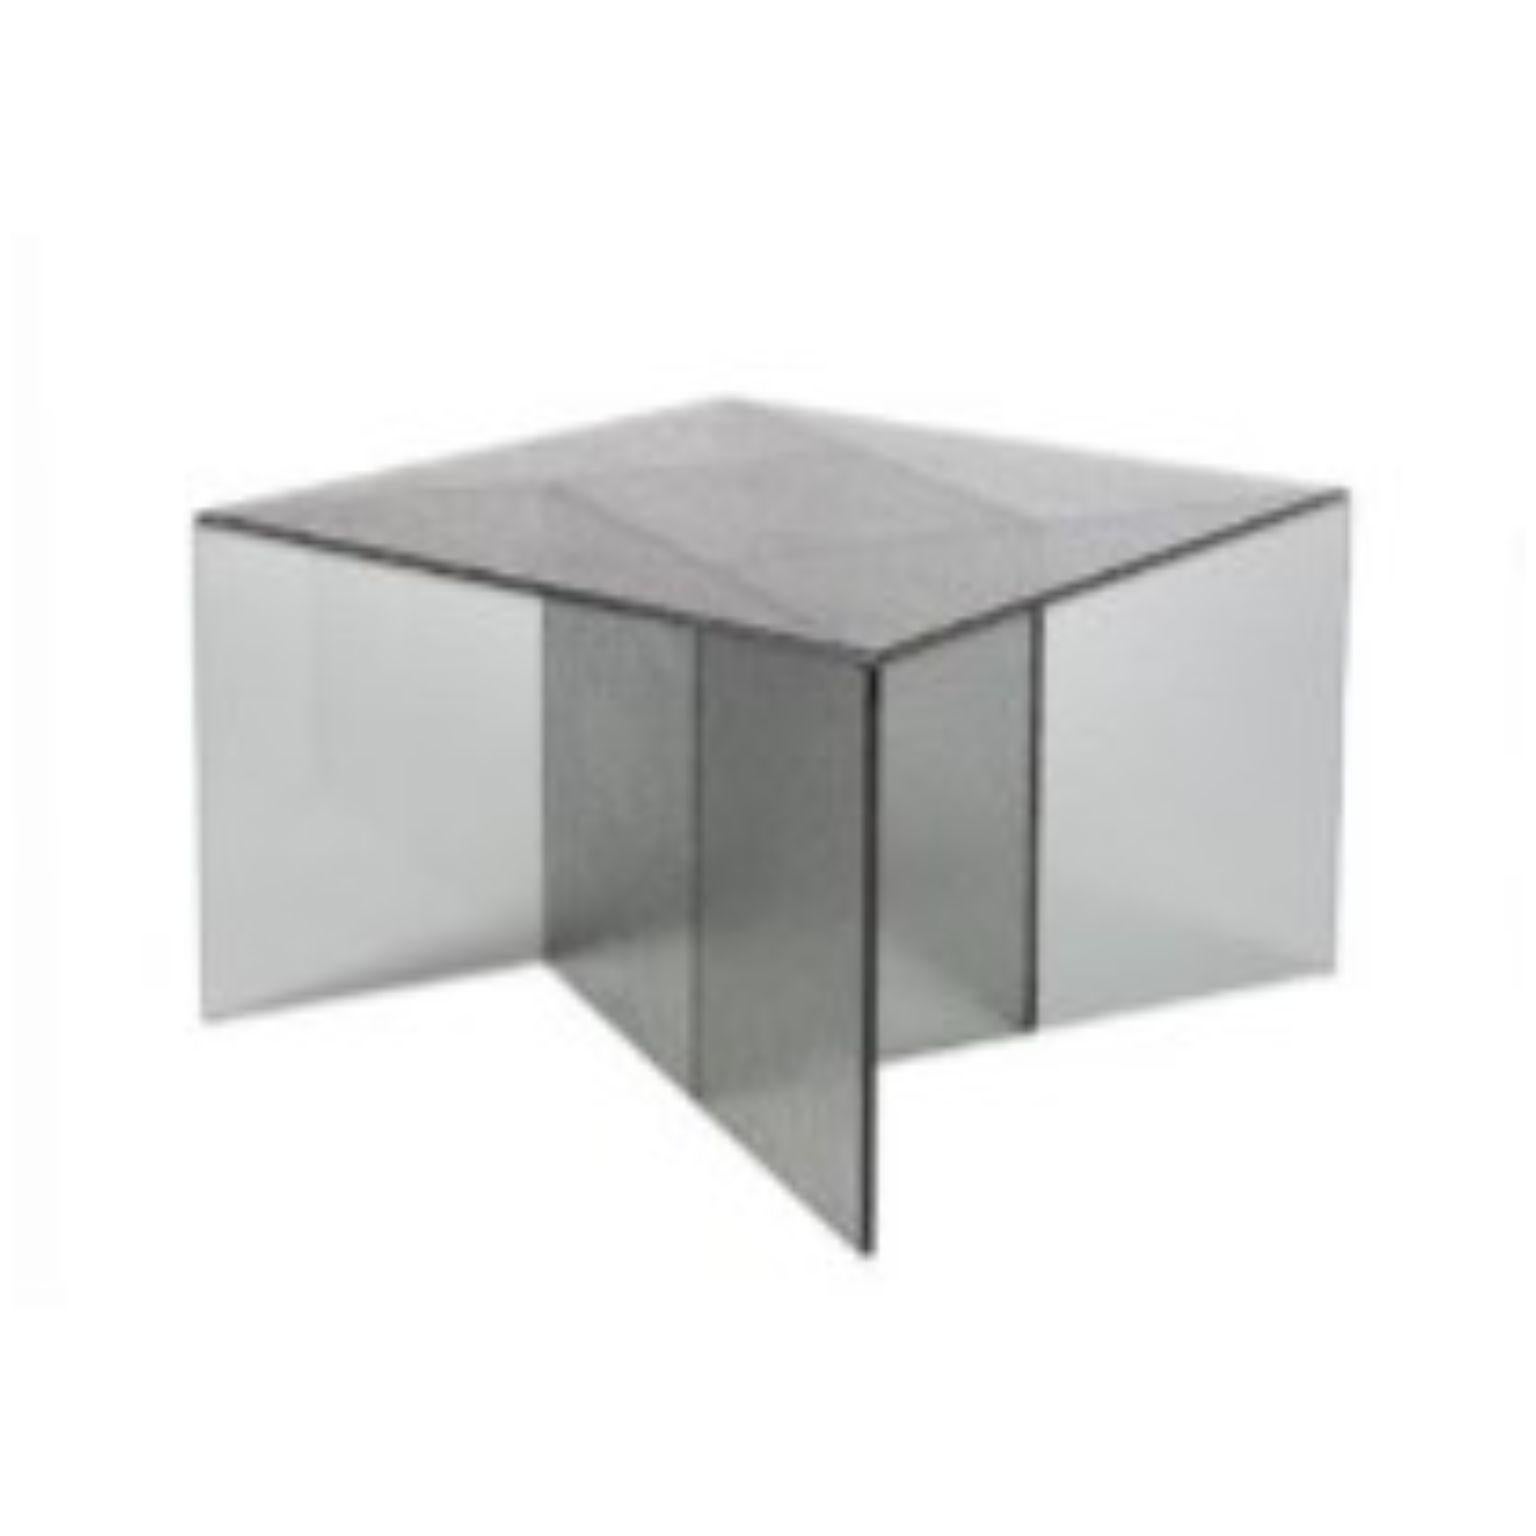 Aspa medium grey coffee table by Pulpo
Dimensions: D60 x W60 x H40 cm
Materials: Glass.

Also available in different colours. 

Variety is a pleasure. Aspa, the side table concept from the Spanish design studio MUT, is a simple study in